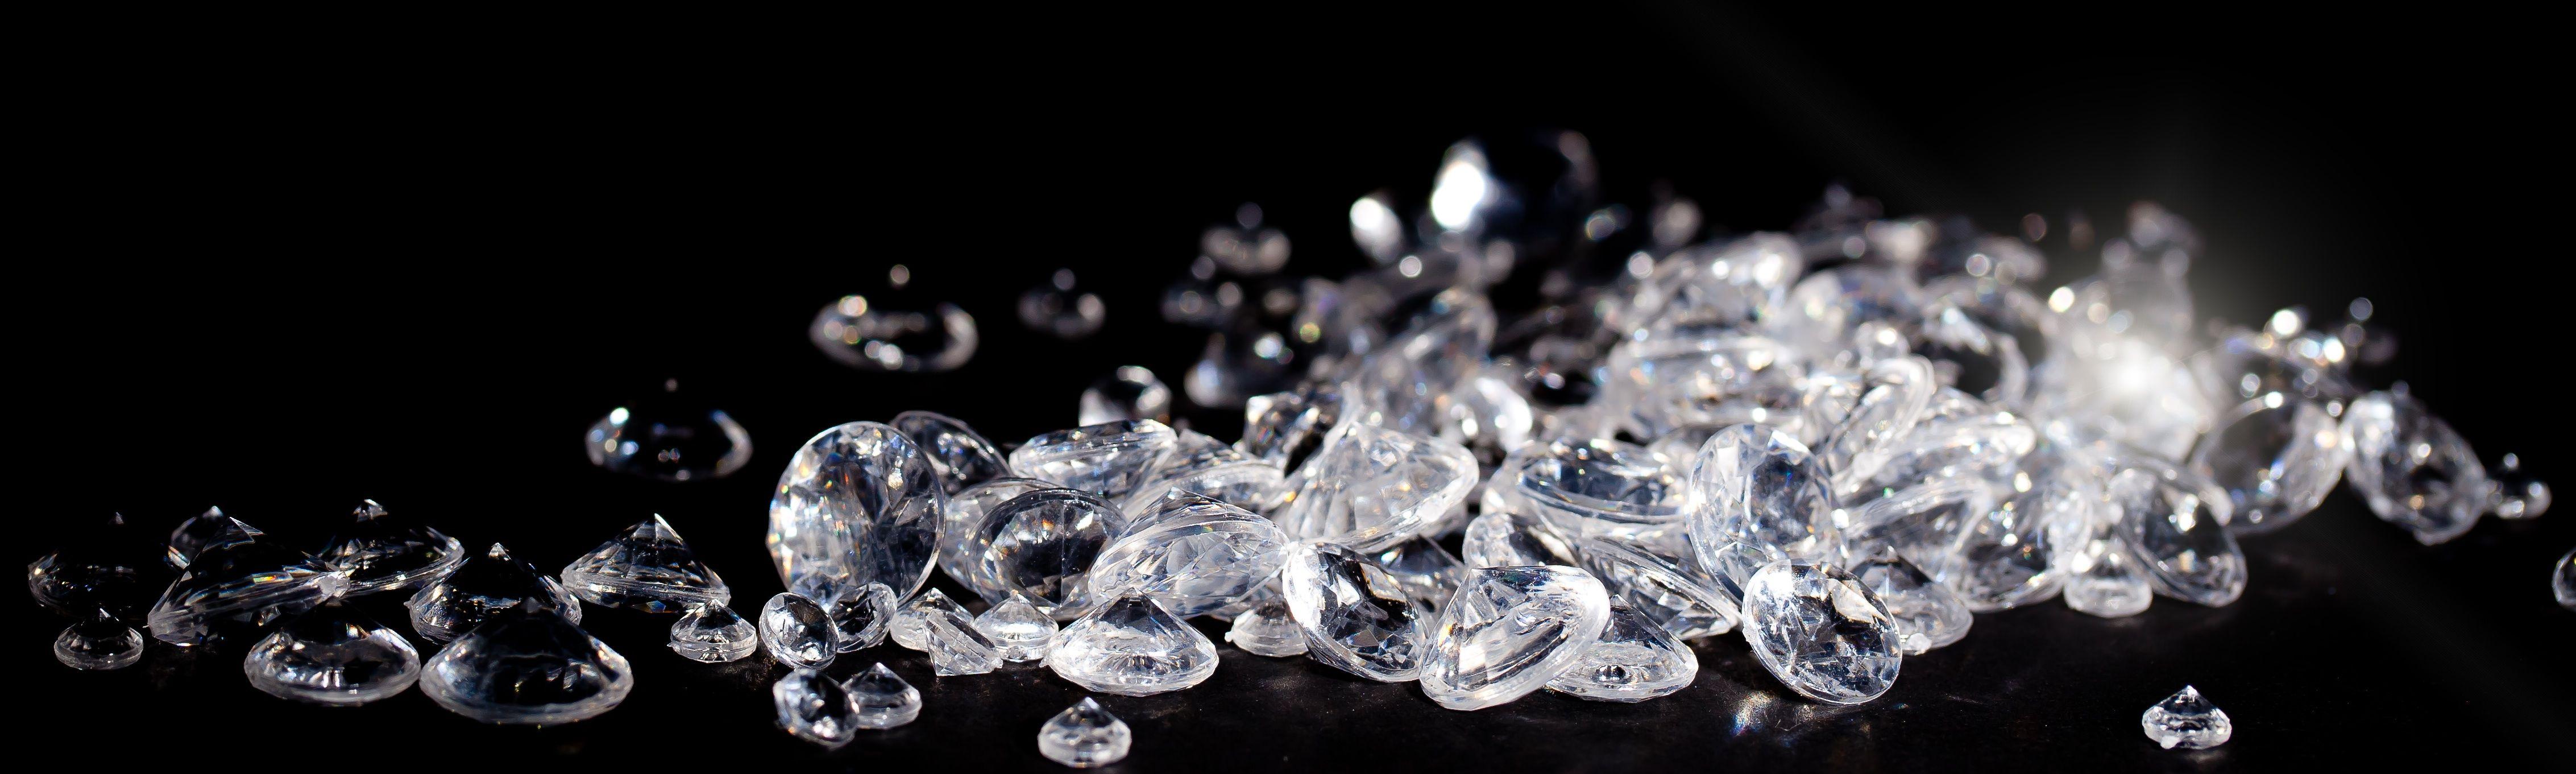 Common Misconceptions About Diamonds